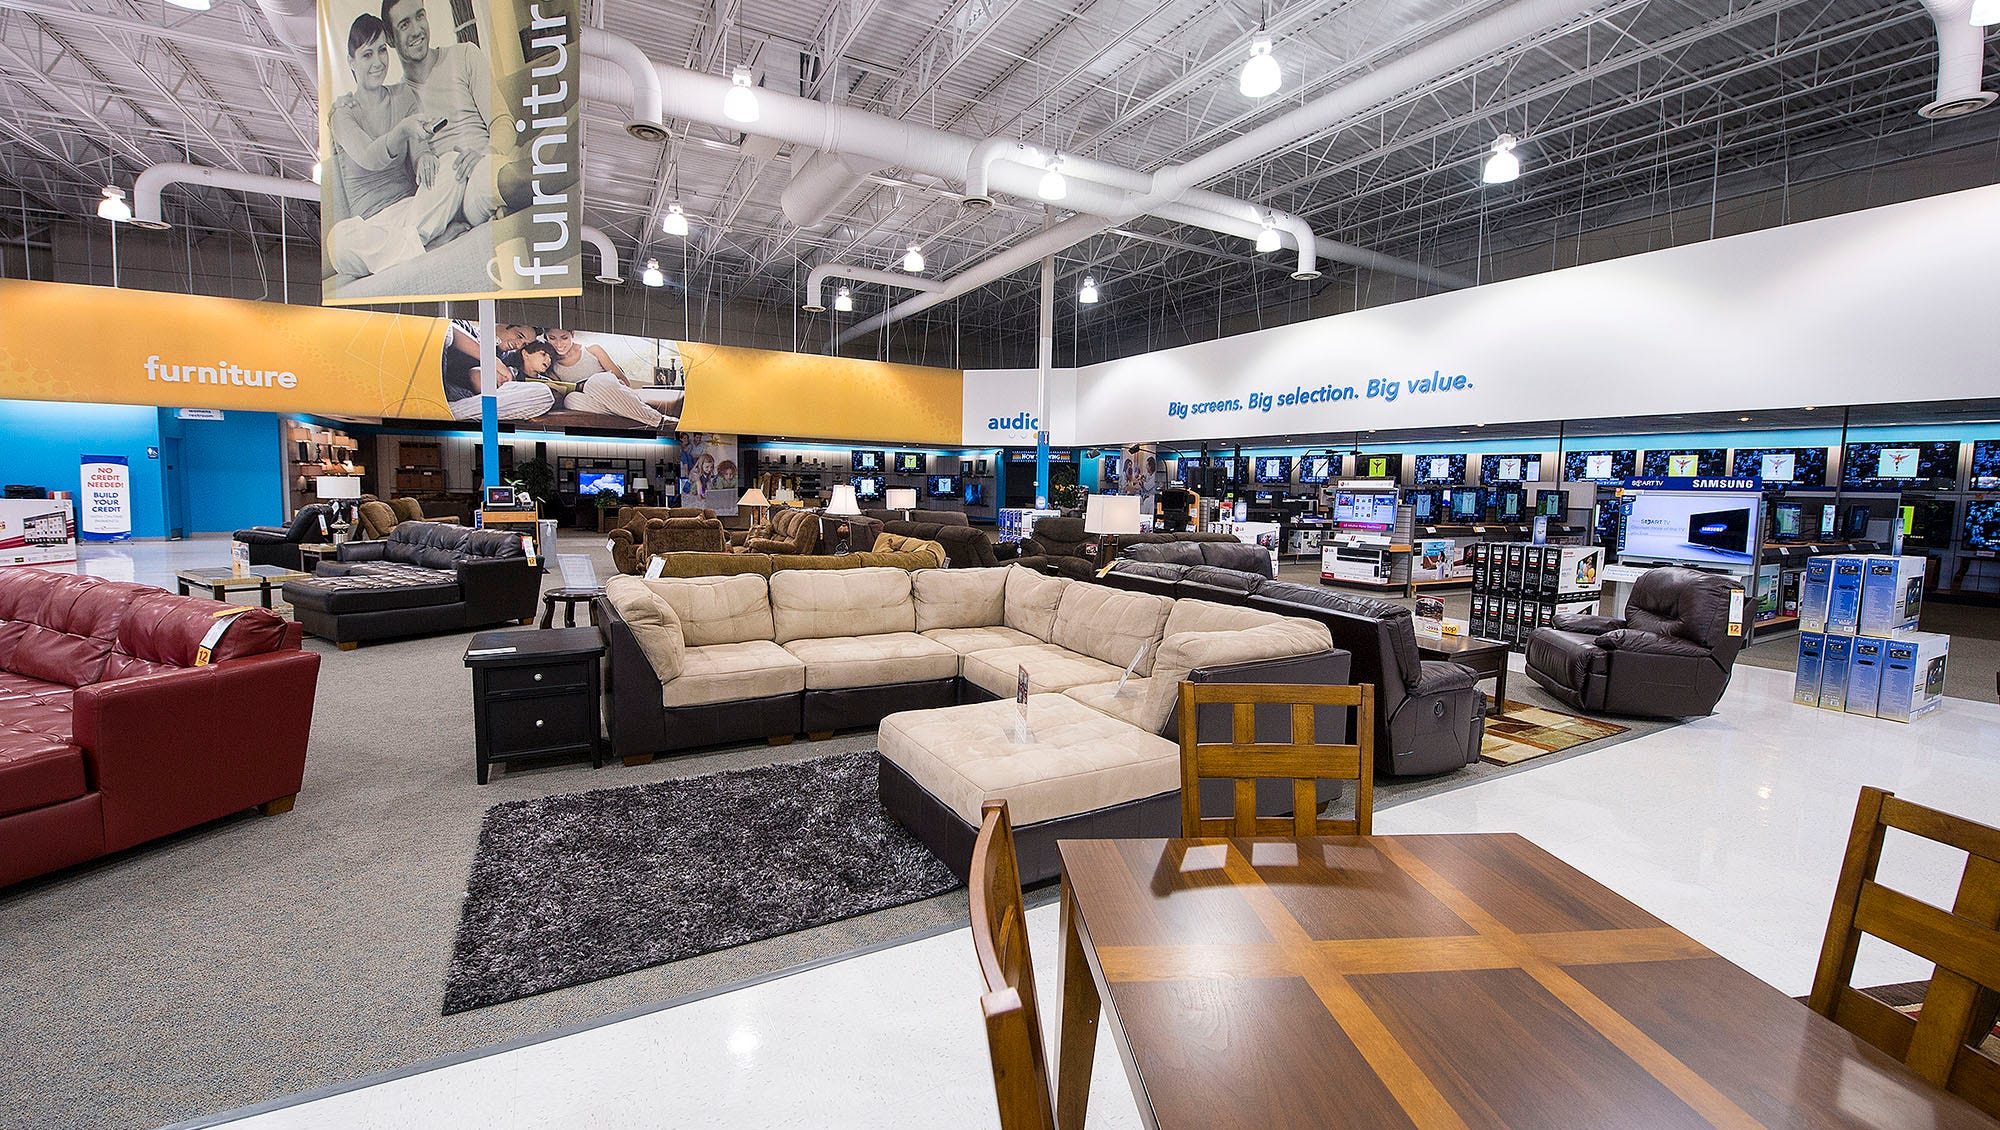 Appliance Retailer Goes From Tvs To Home Furnishings